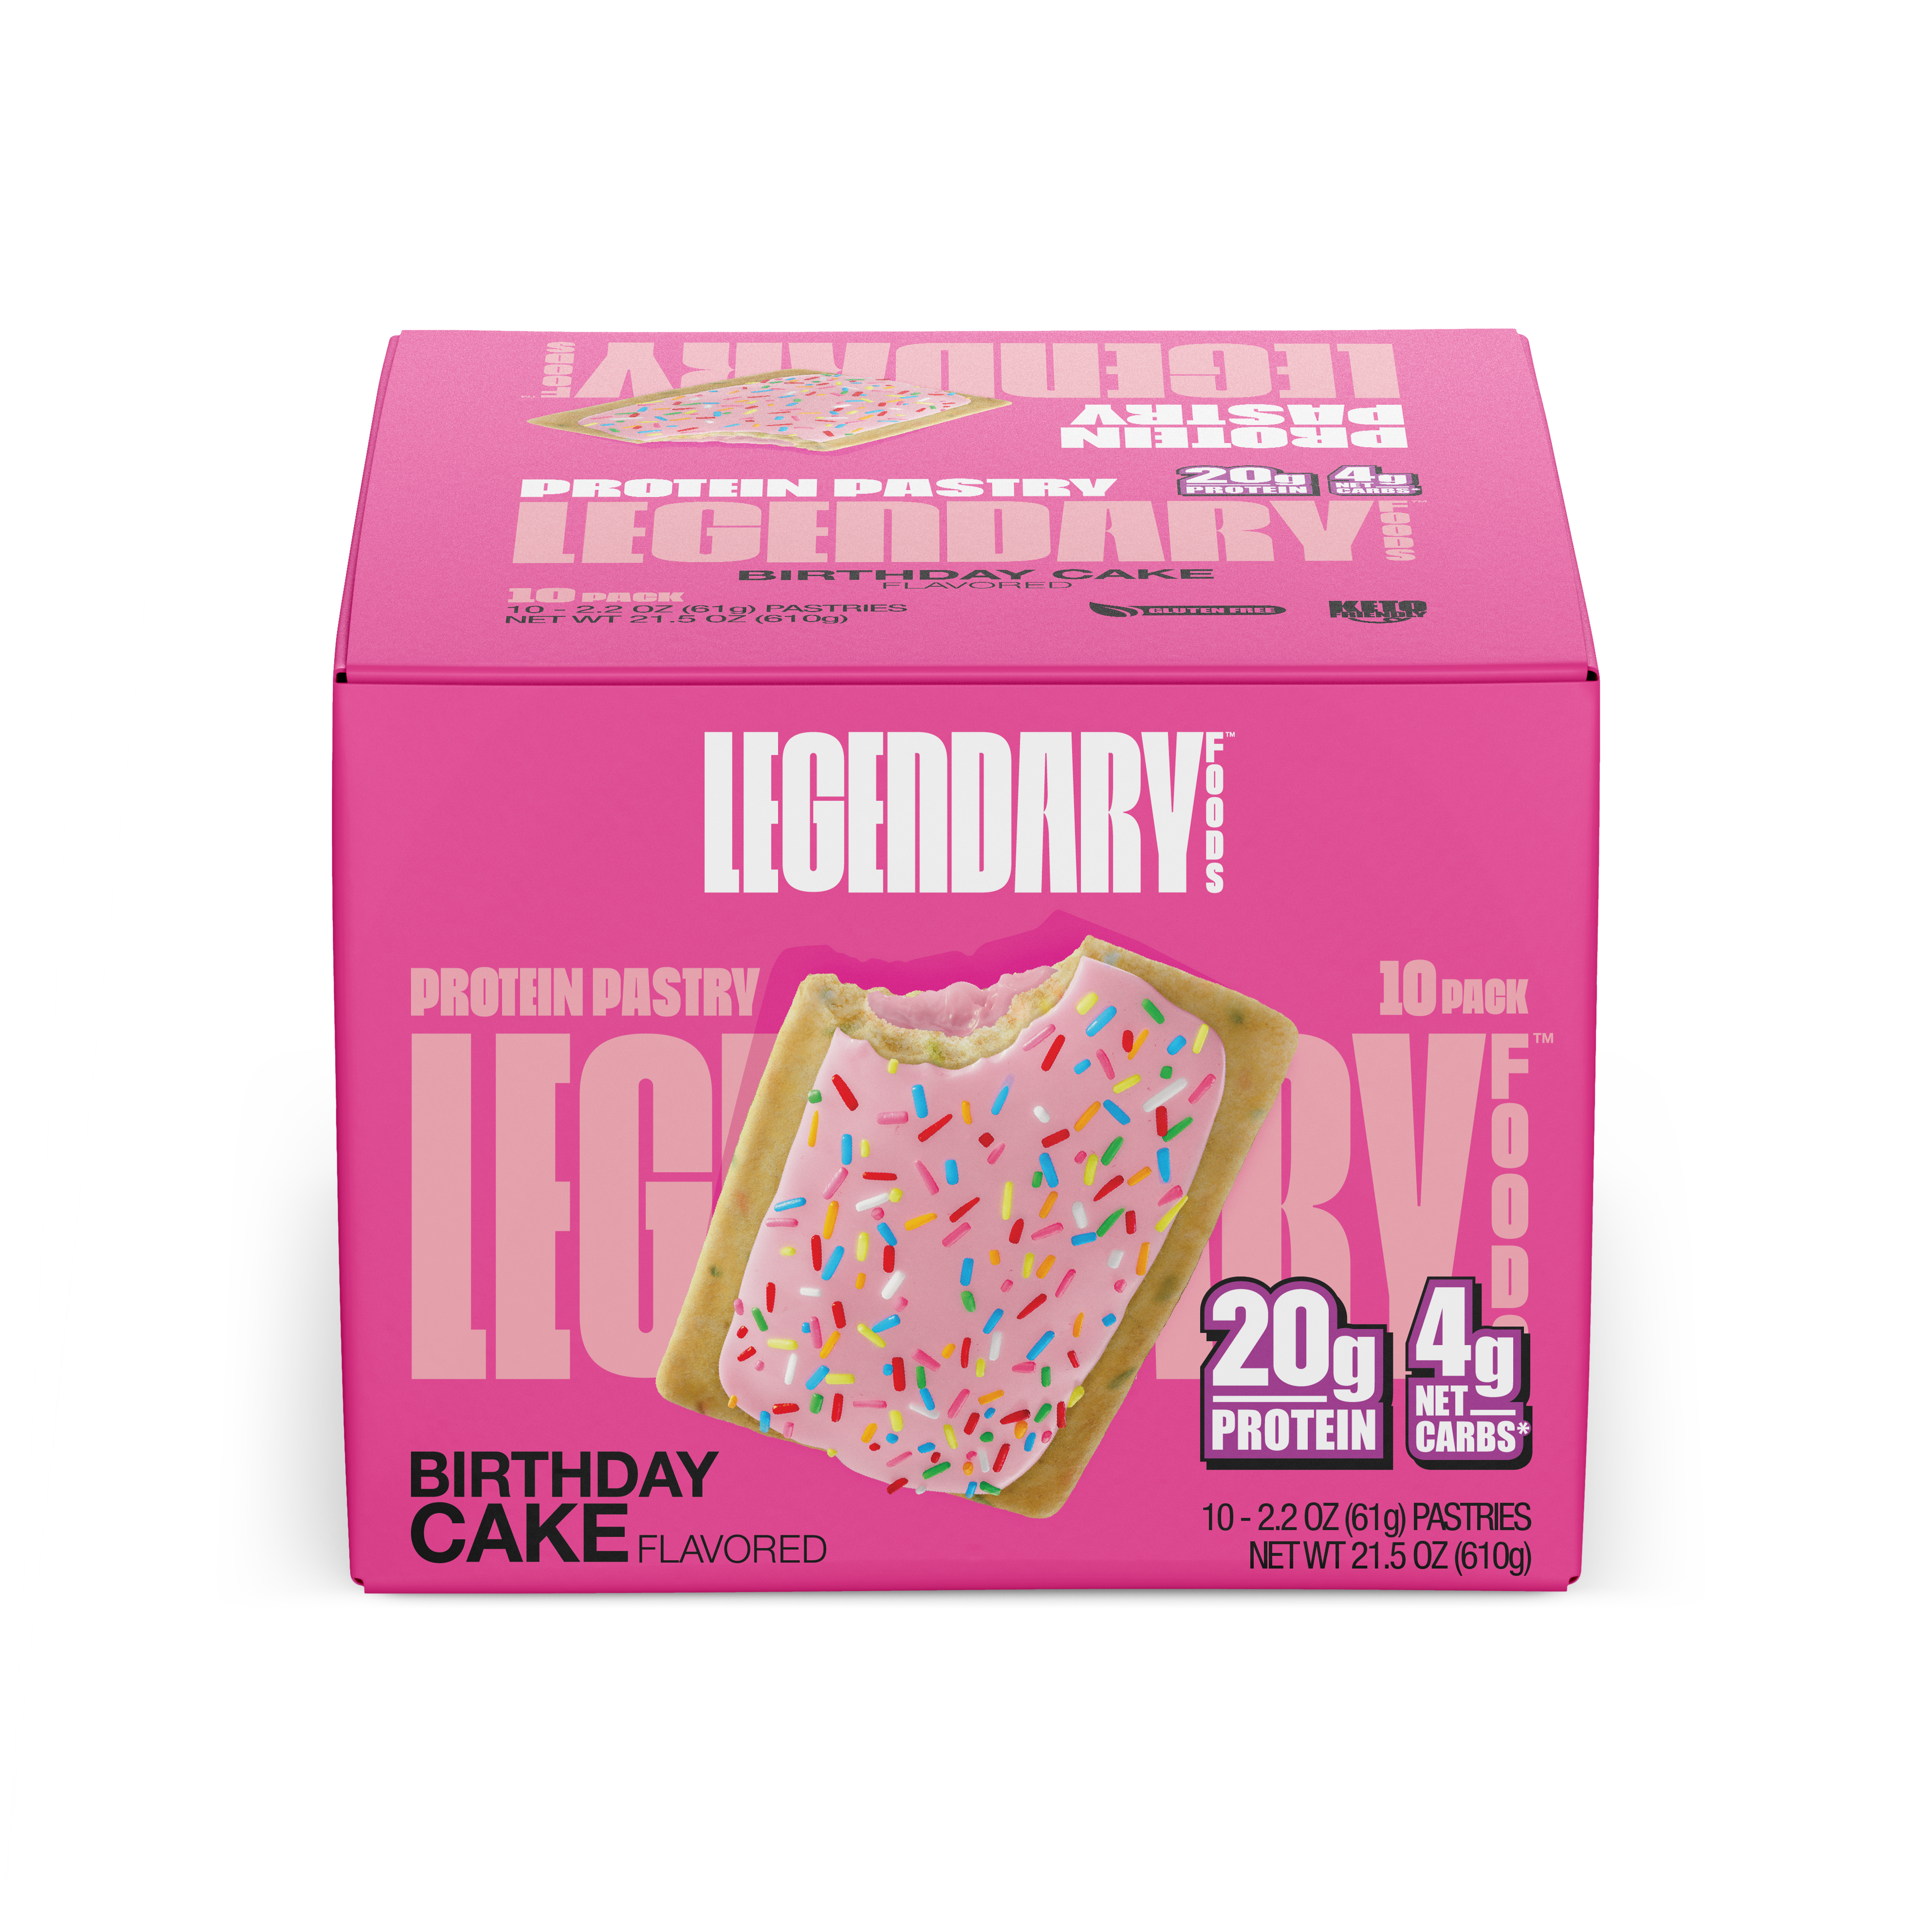 "Cake Style" Low-Carb Protein Pastry by Legendary Foods - Birthday Cake